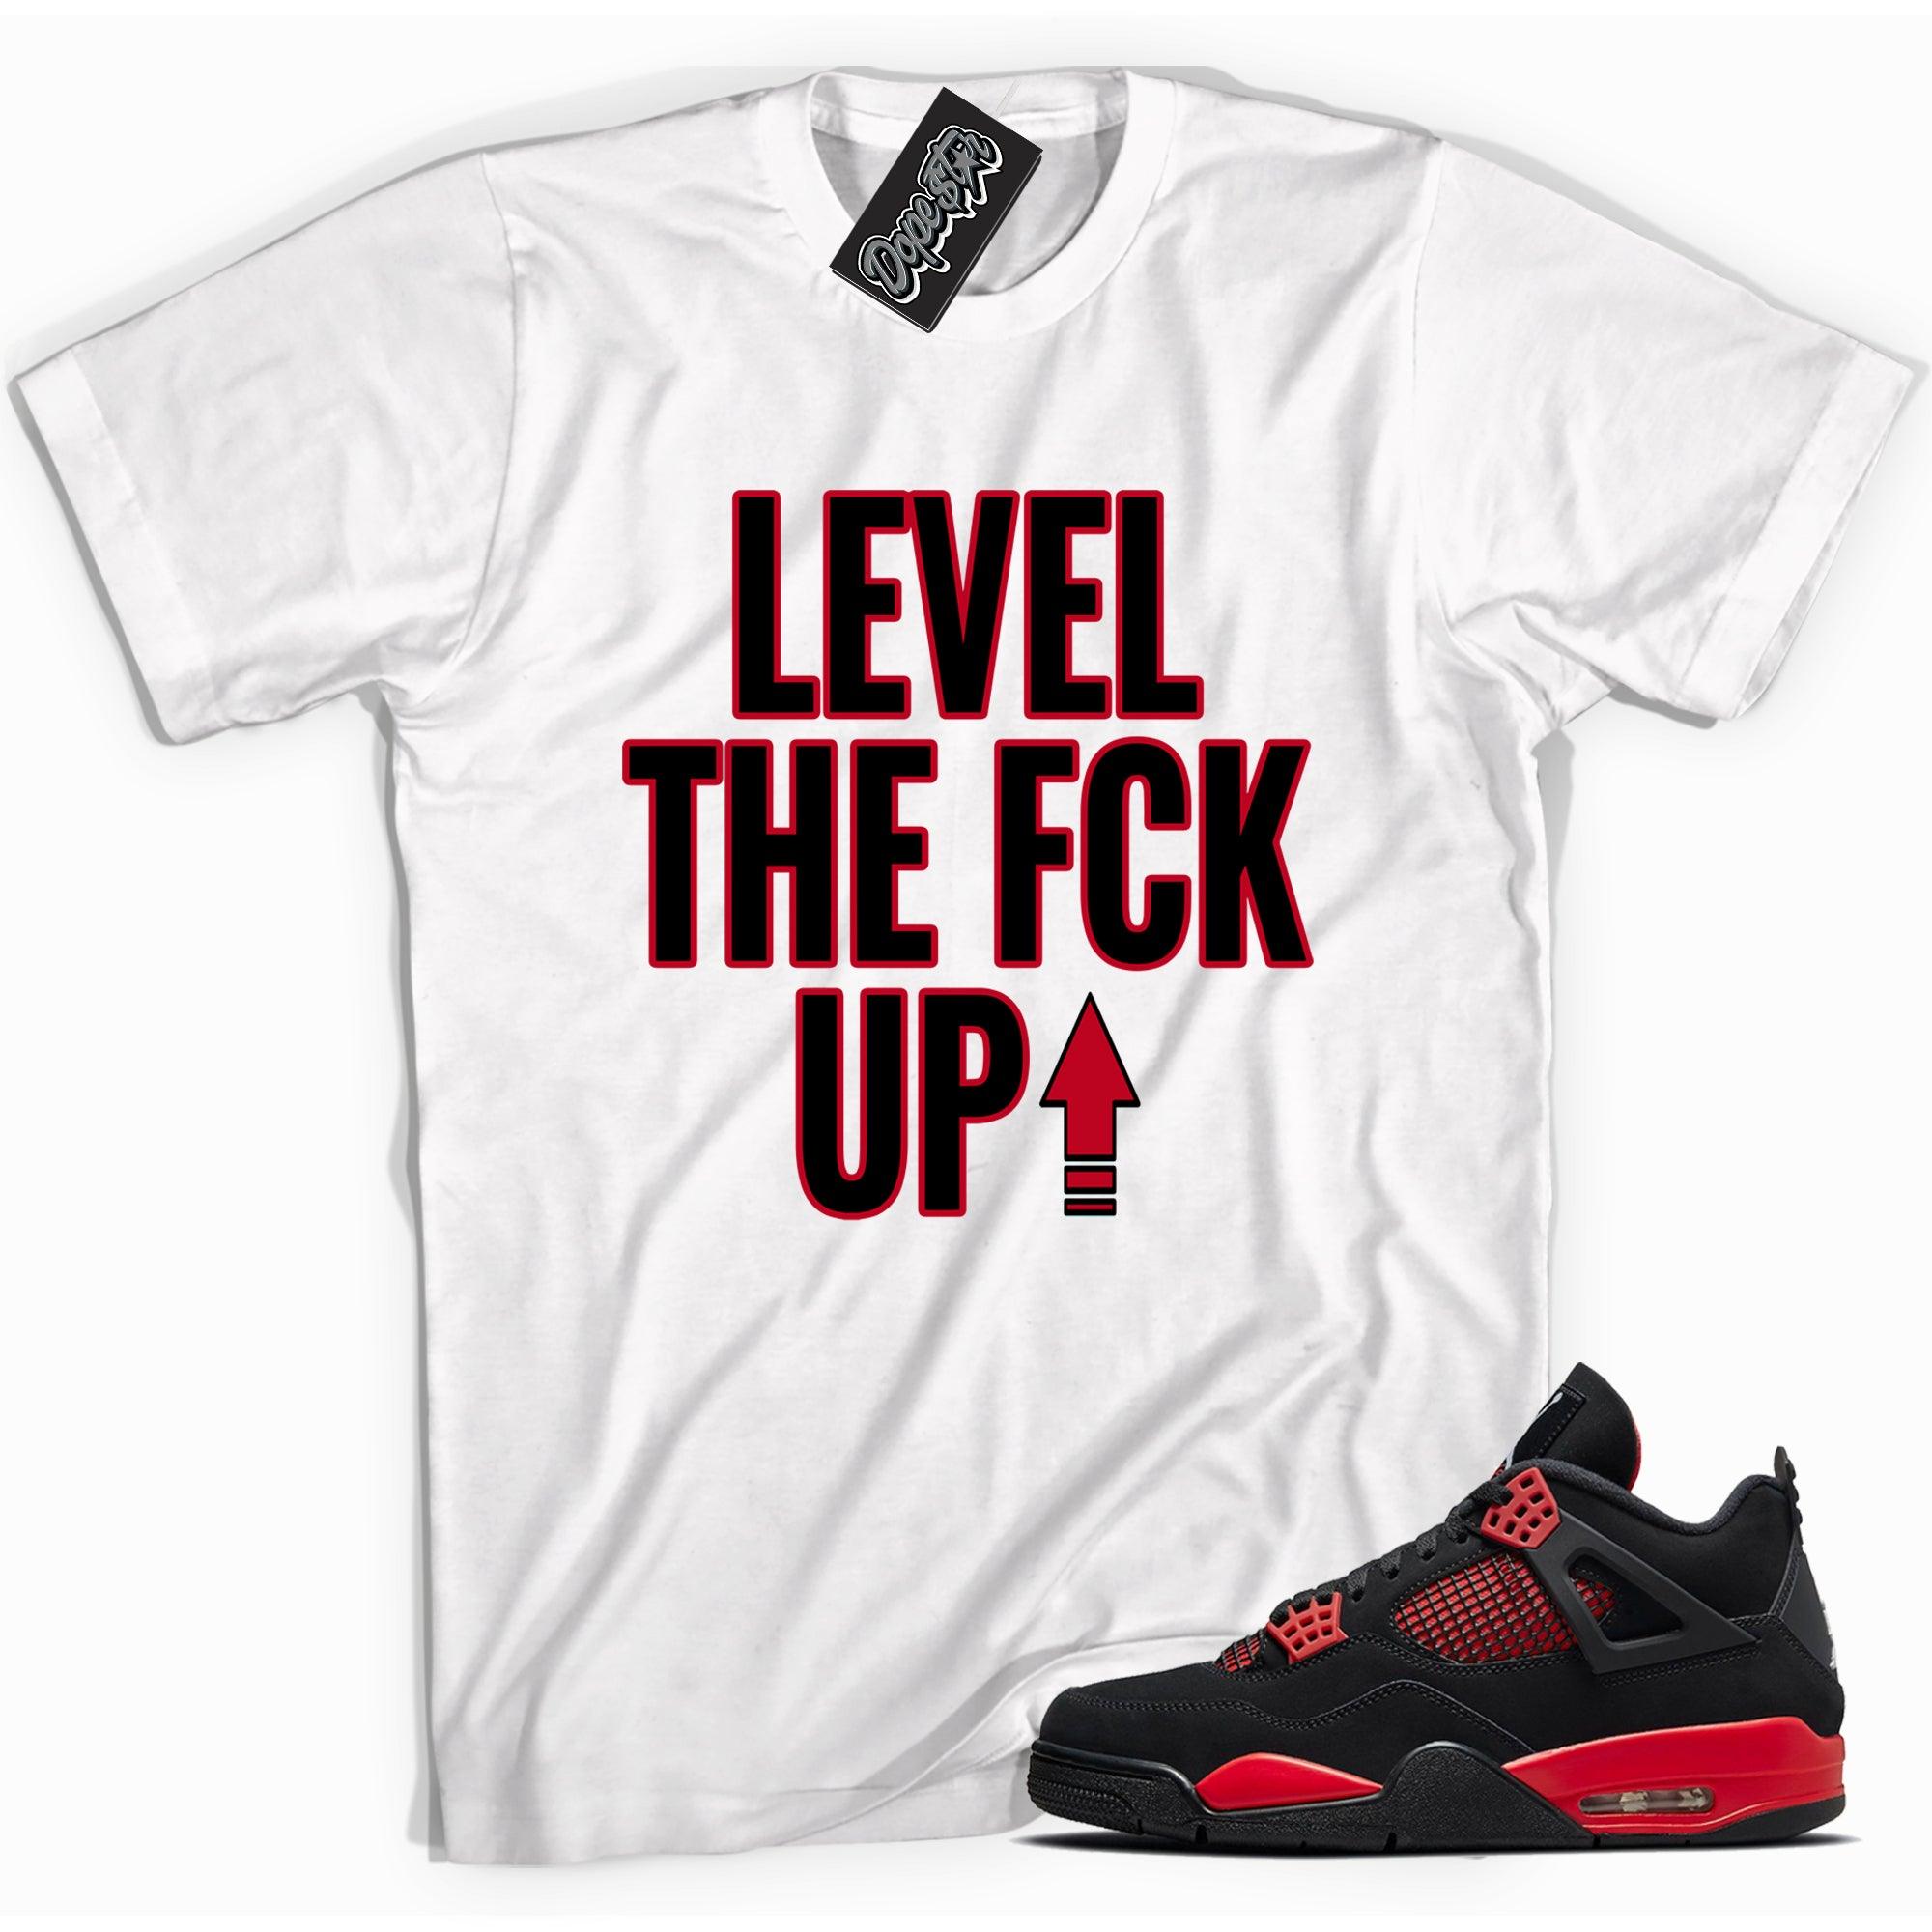 Cool white graphic tee with 'Level Up' print, that perfectly matches Air Jordan 4 Red Thunder Toe sneakers.